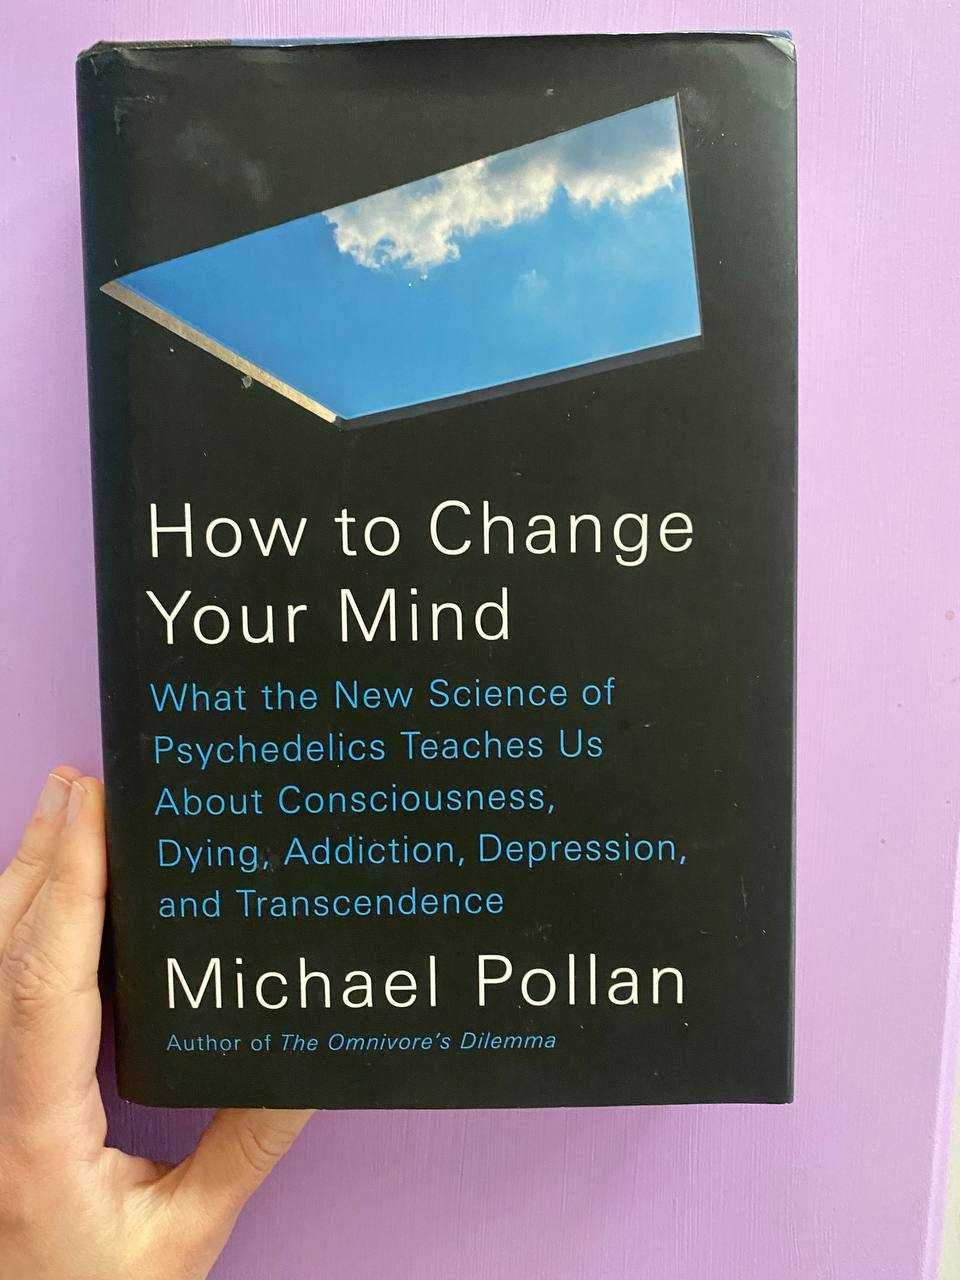 How to Change Your Mind with Psychedelics, Michael Pollan